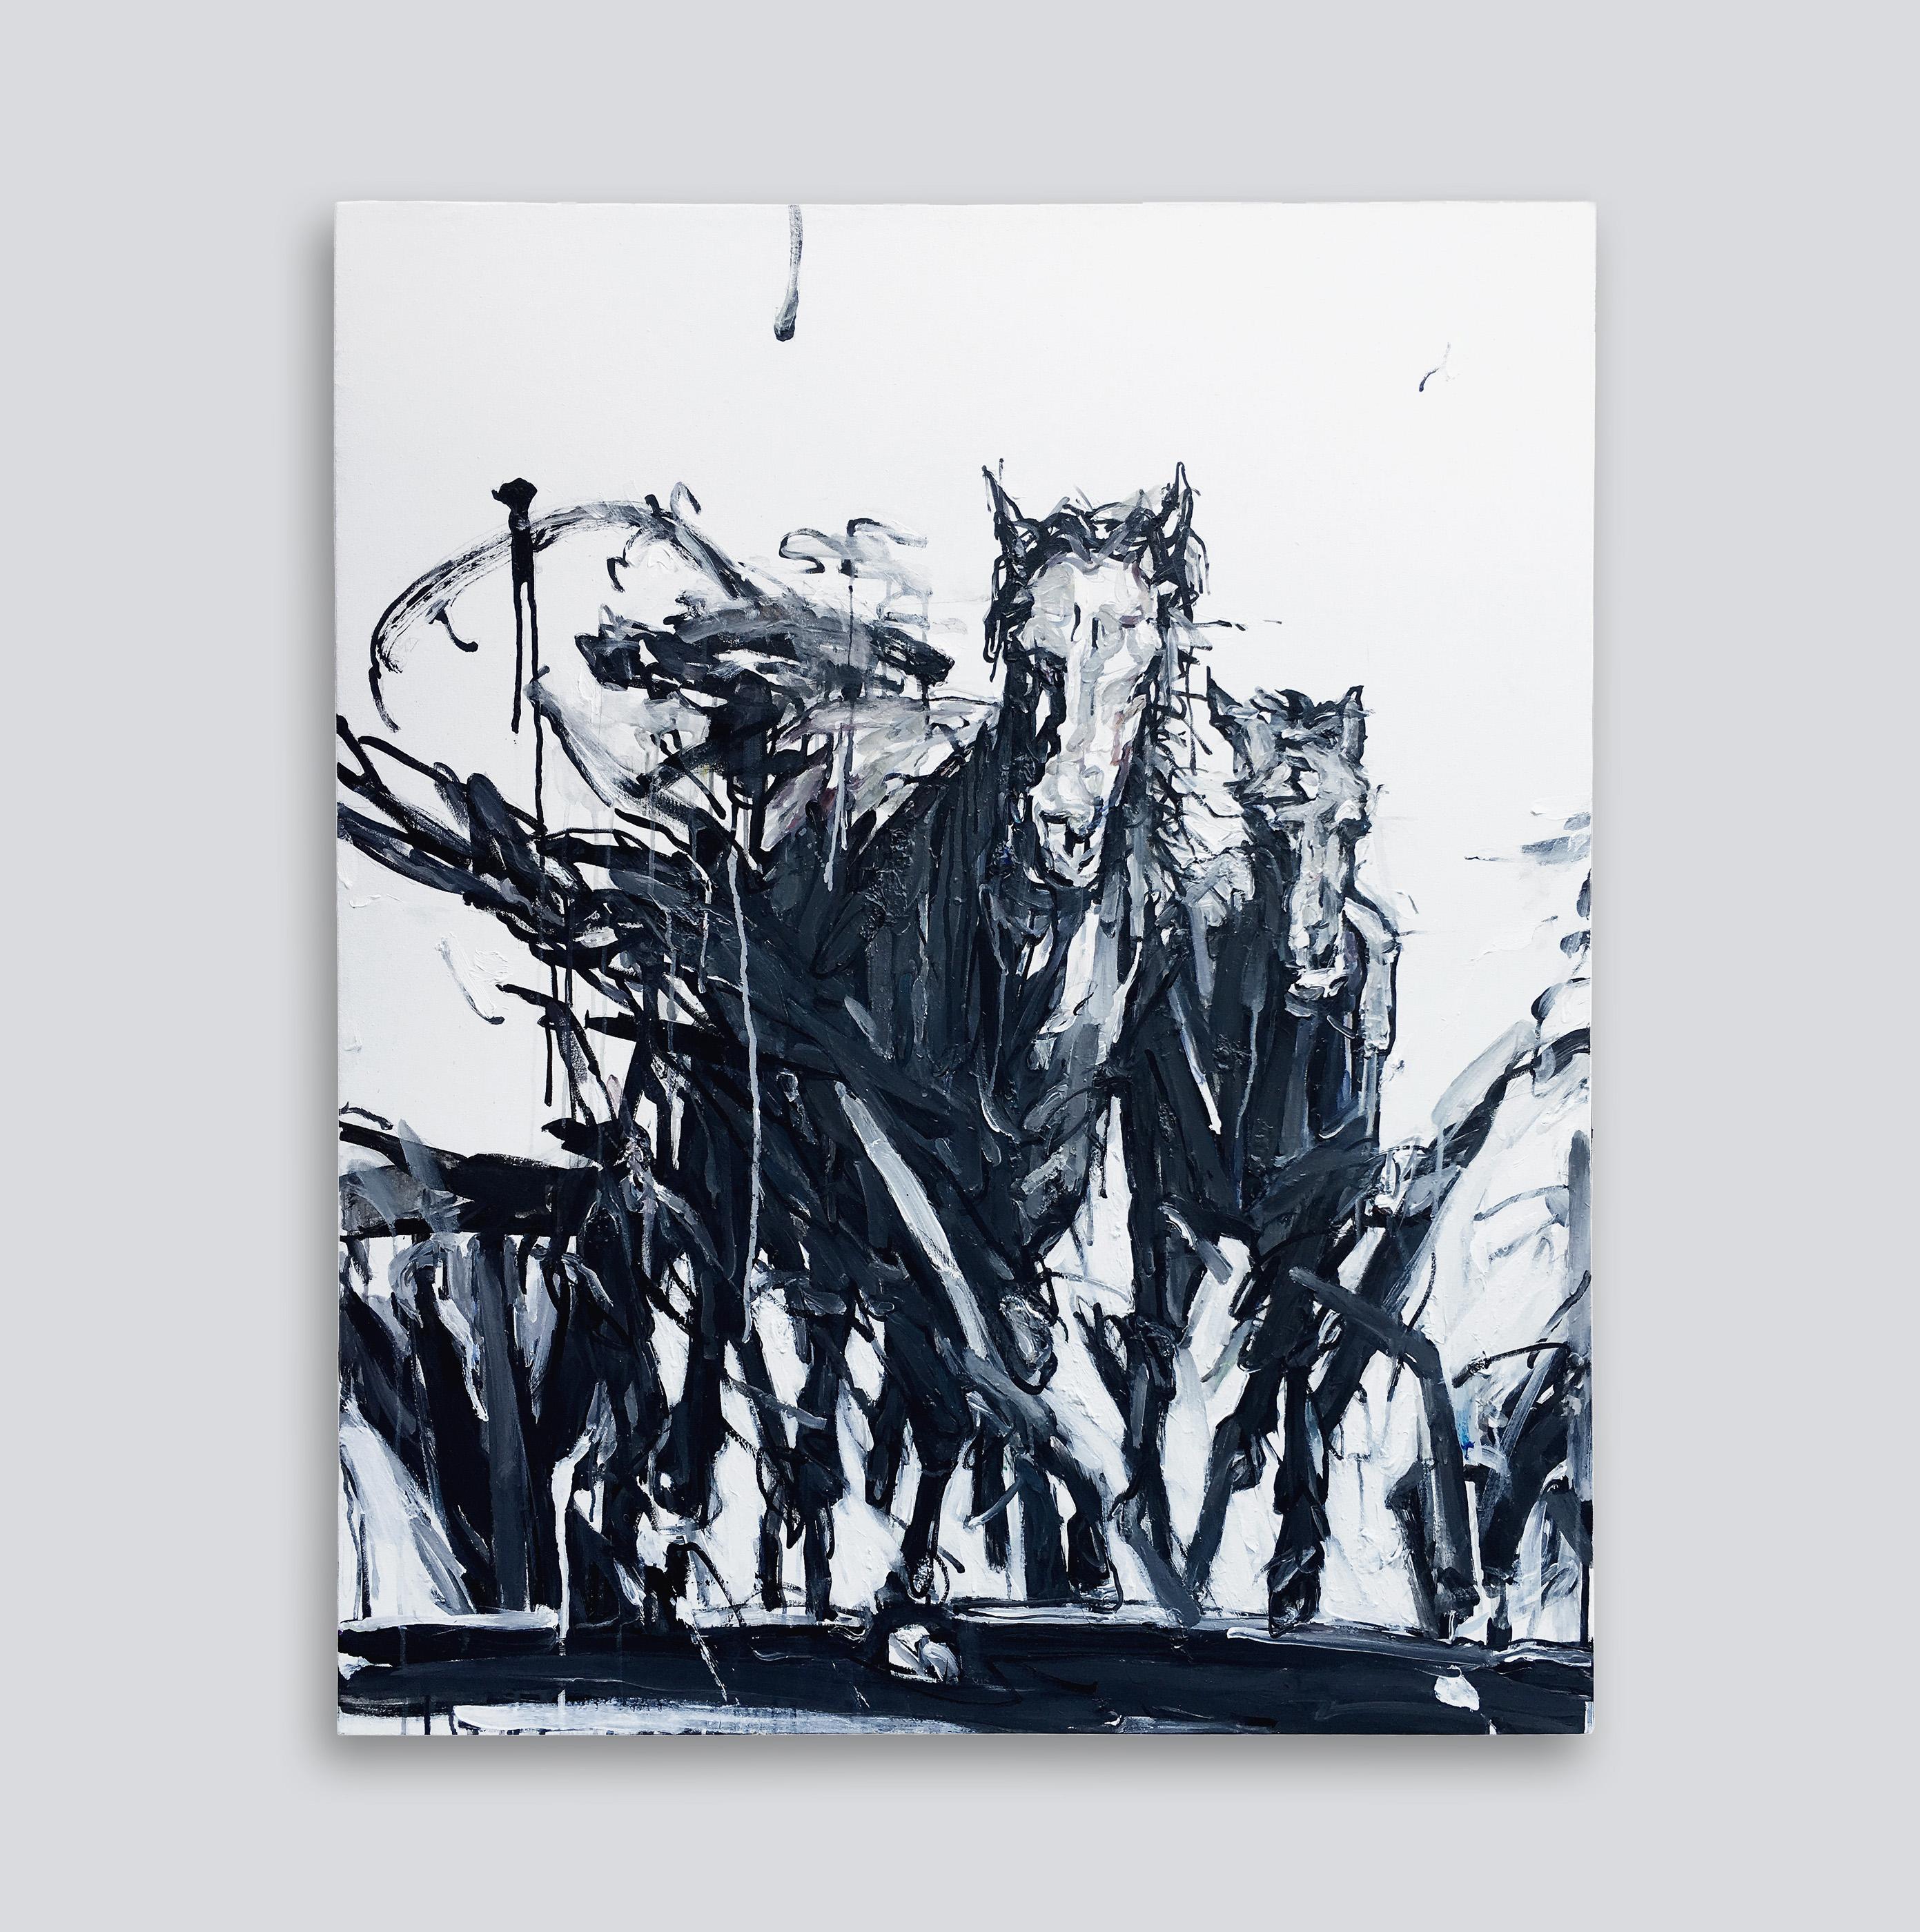 The Herd - Abstract Expressionist Art by Shao Yuan Zhang